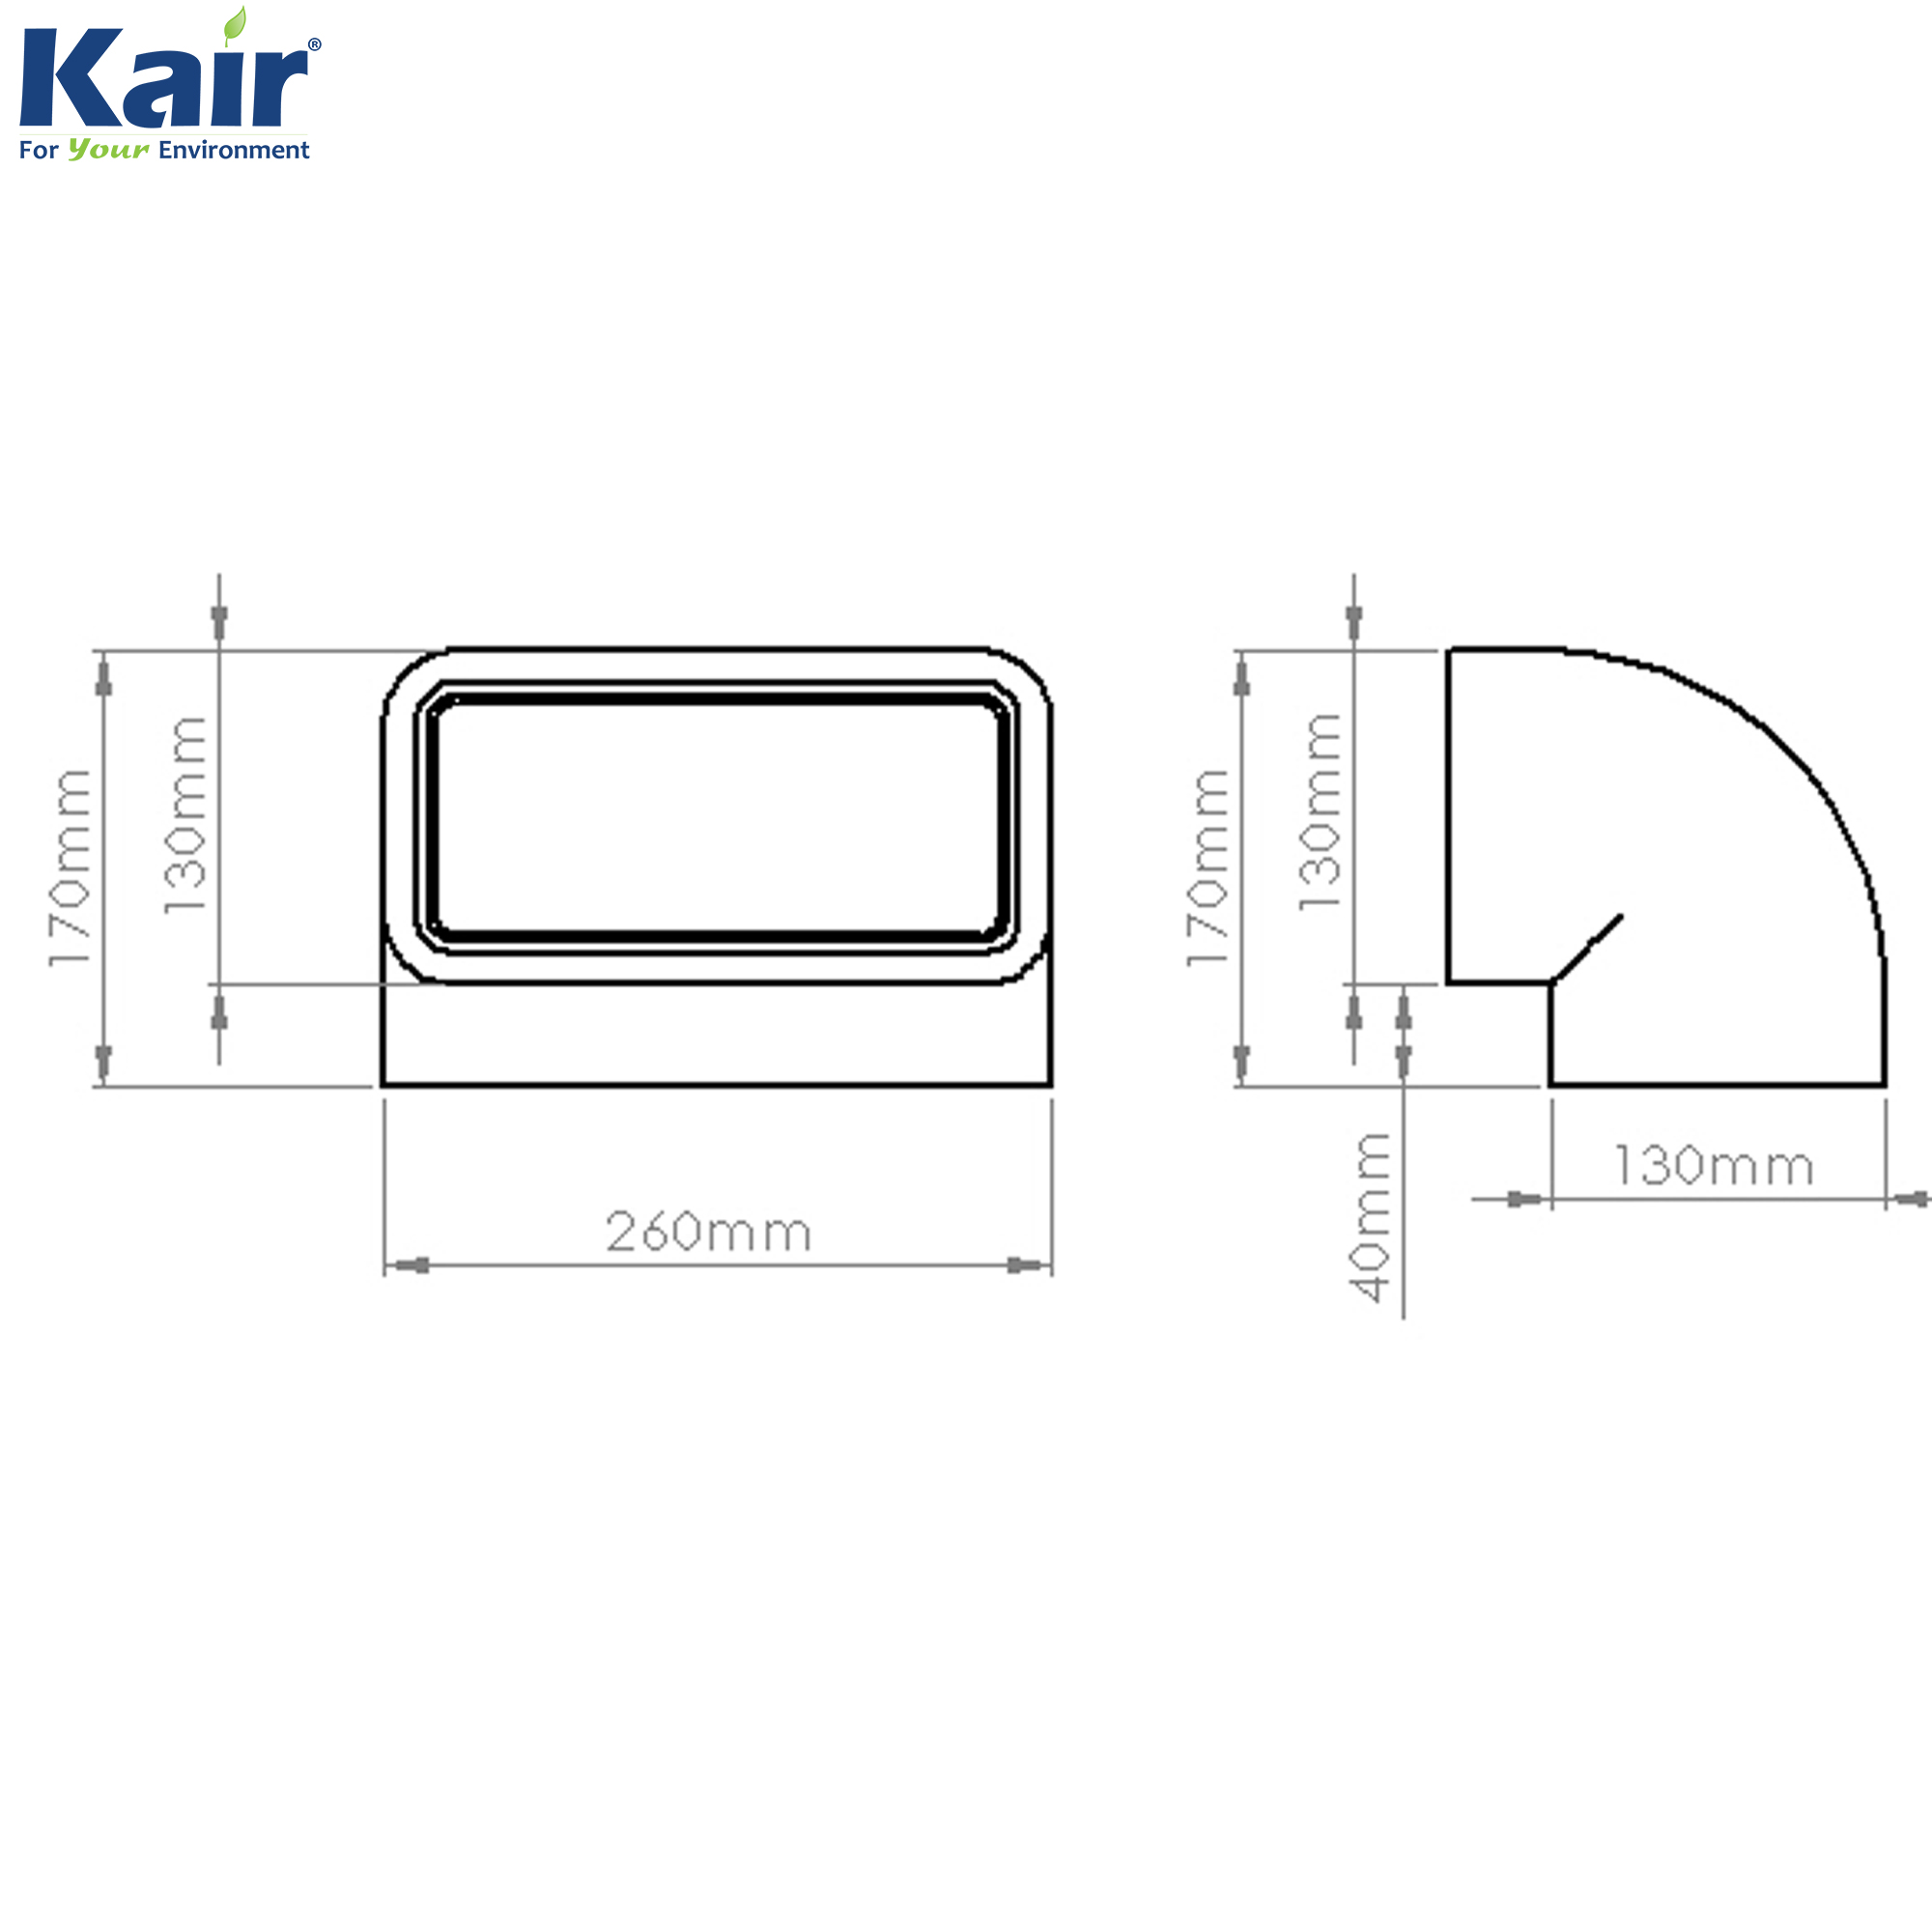 Box of 6 x Kair Self-Seal Thermal Ducting 220X90mm Vertical 90 Degree Bends With Female Click & Lock Fitting